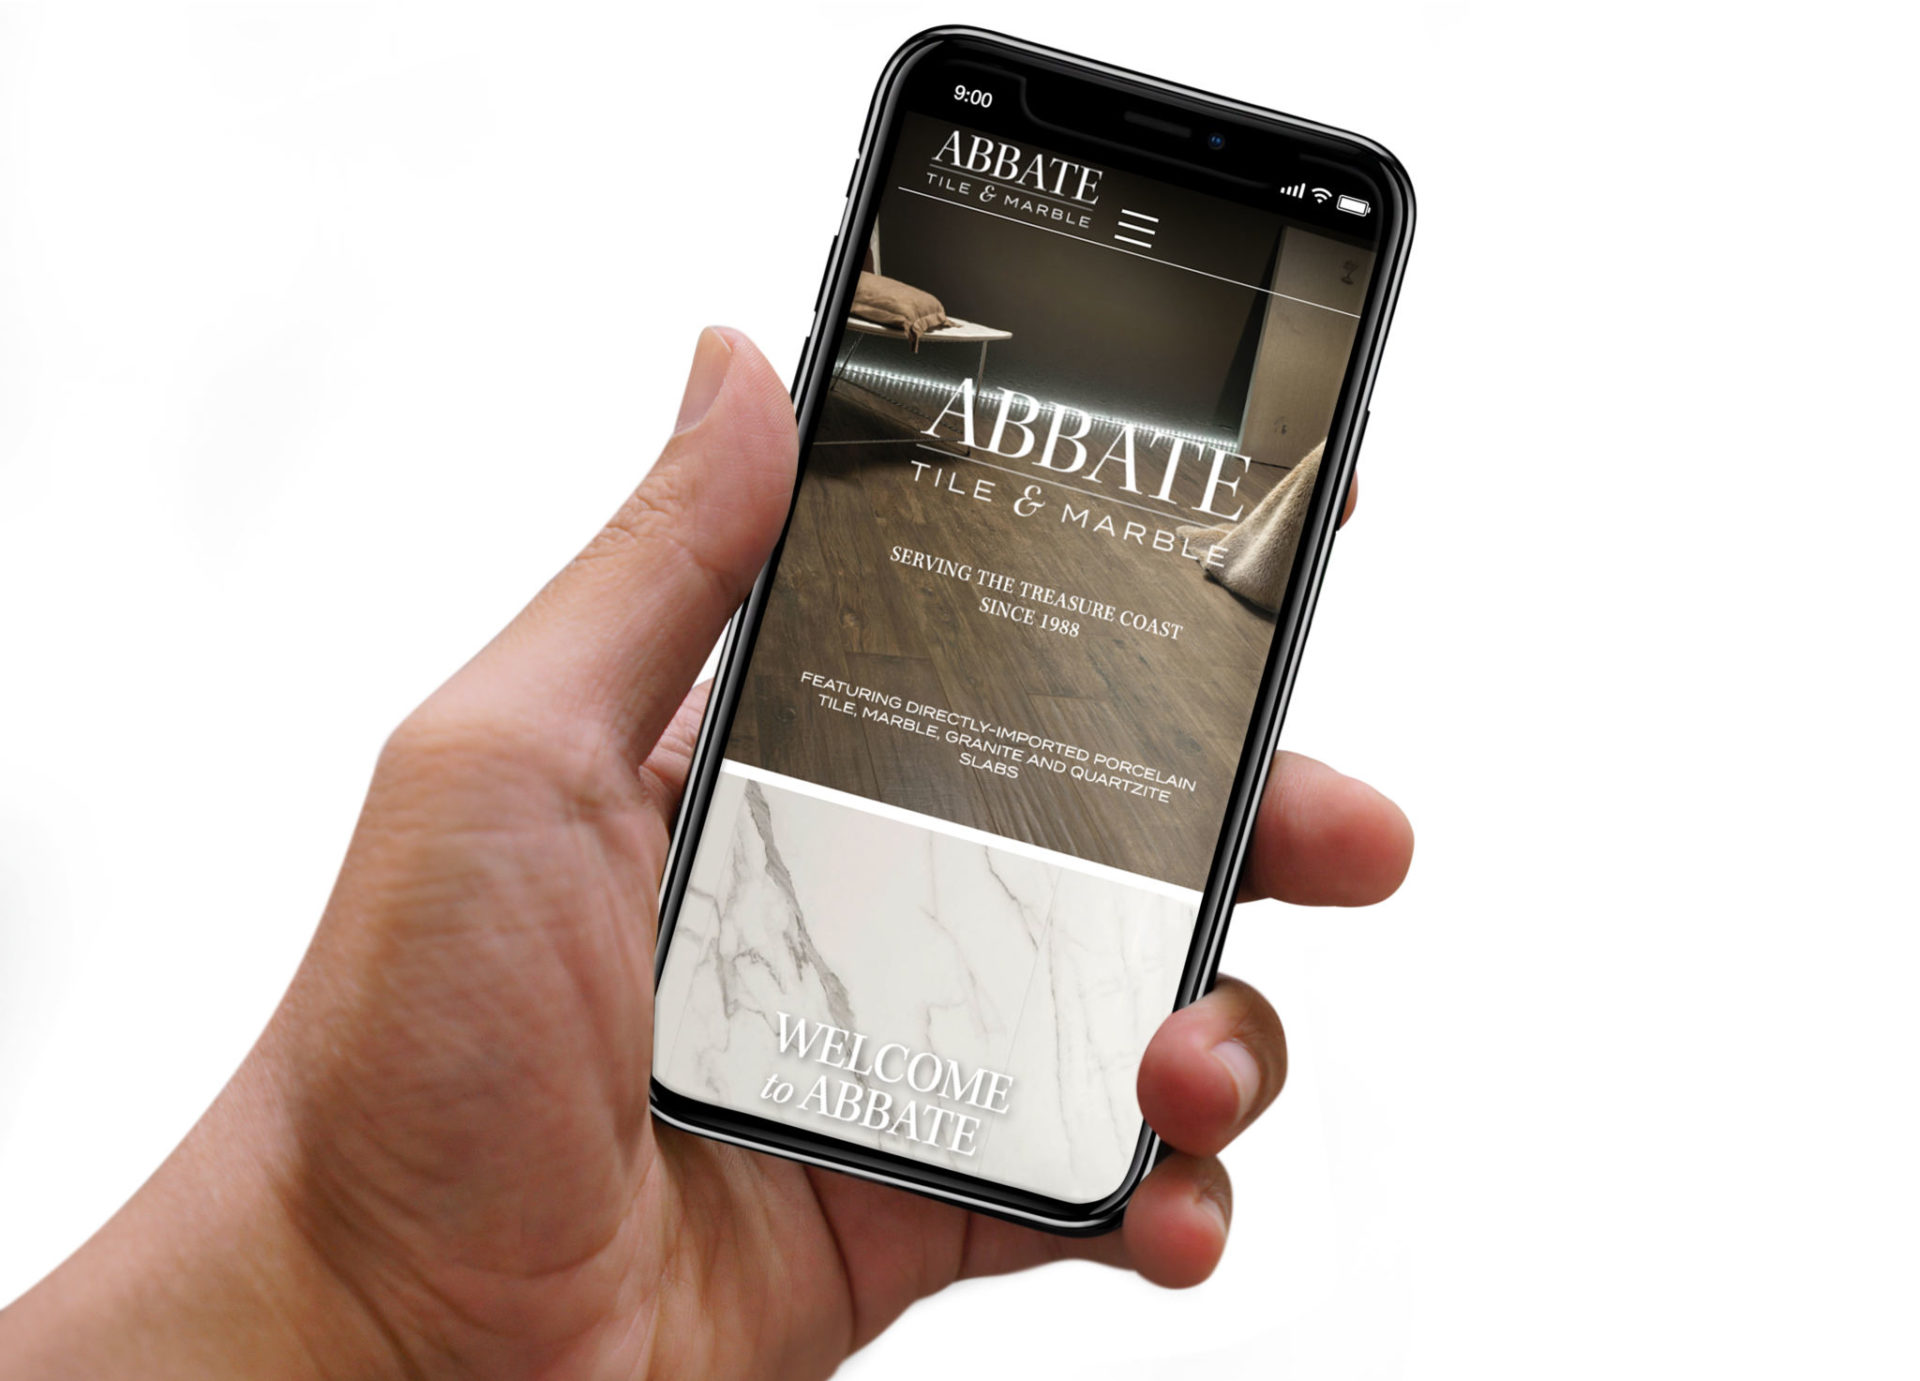 Web design work we did for Abbate Tile and Marble in Vero Beach.